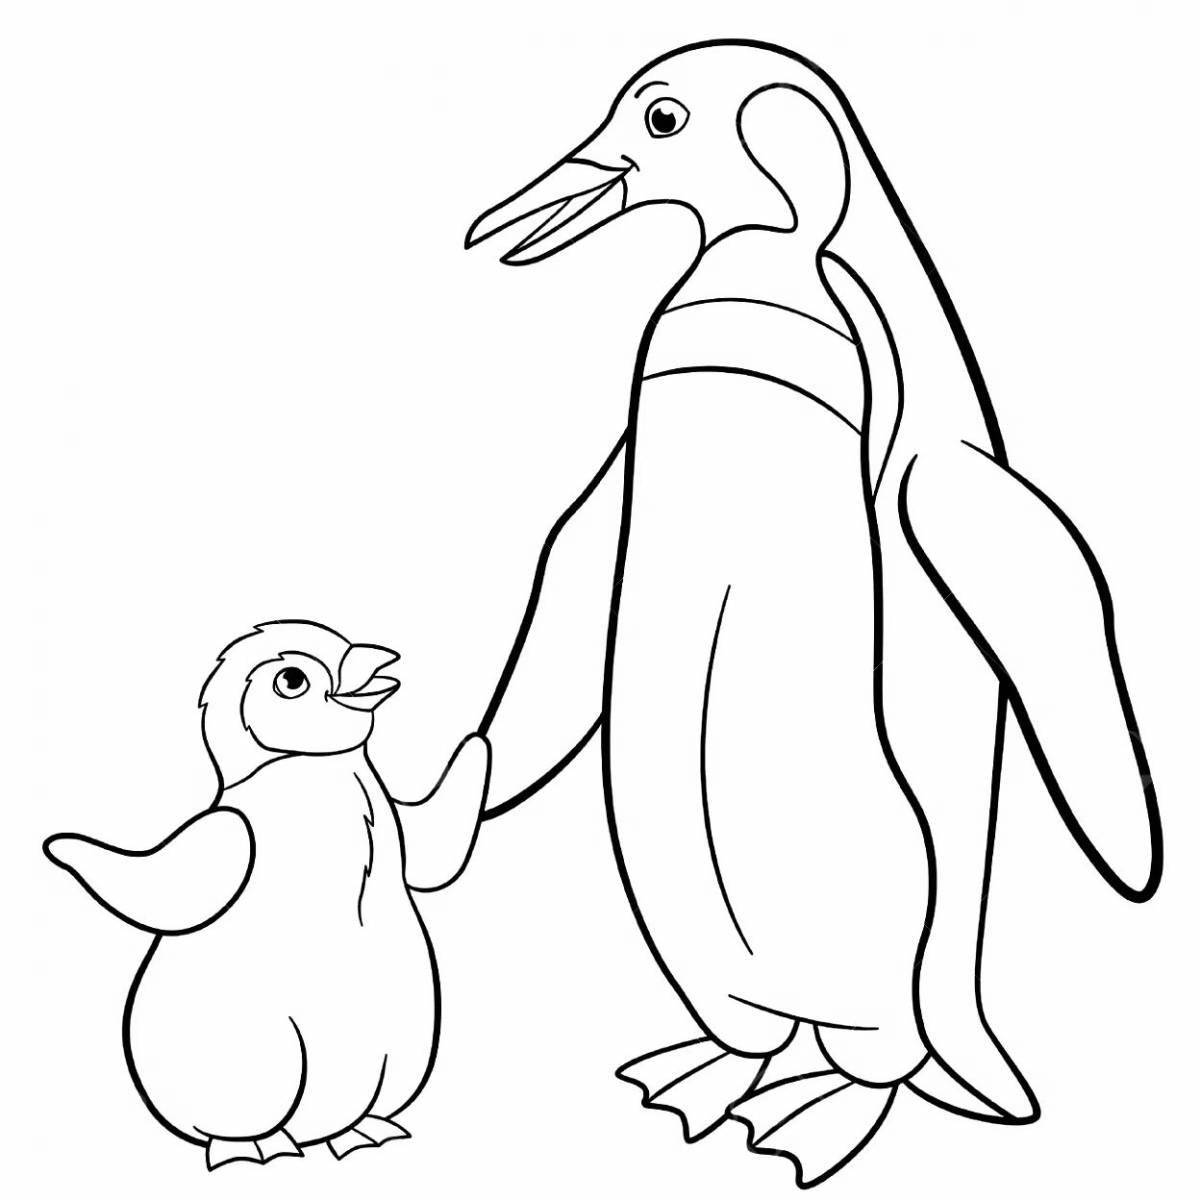 Fabulous penguin on an ice floe coloring pages for kids